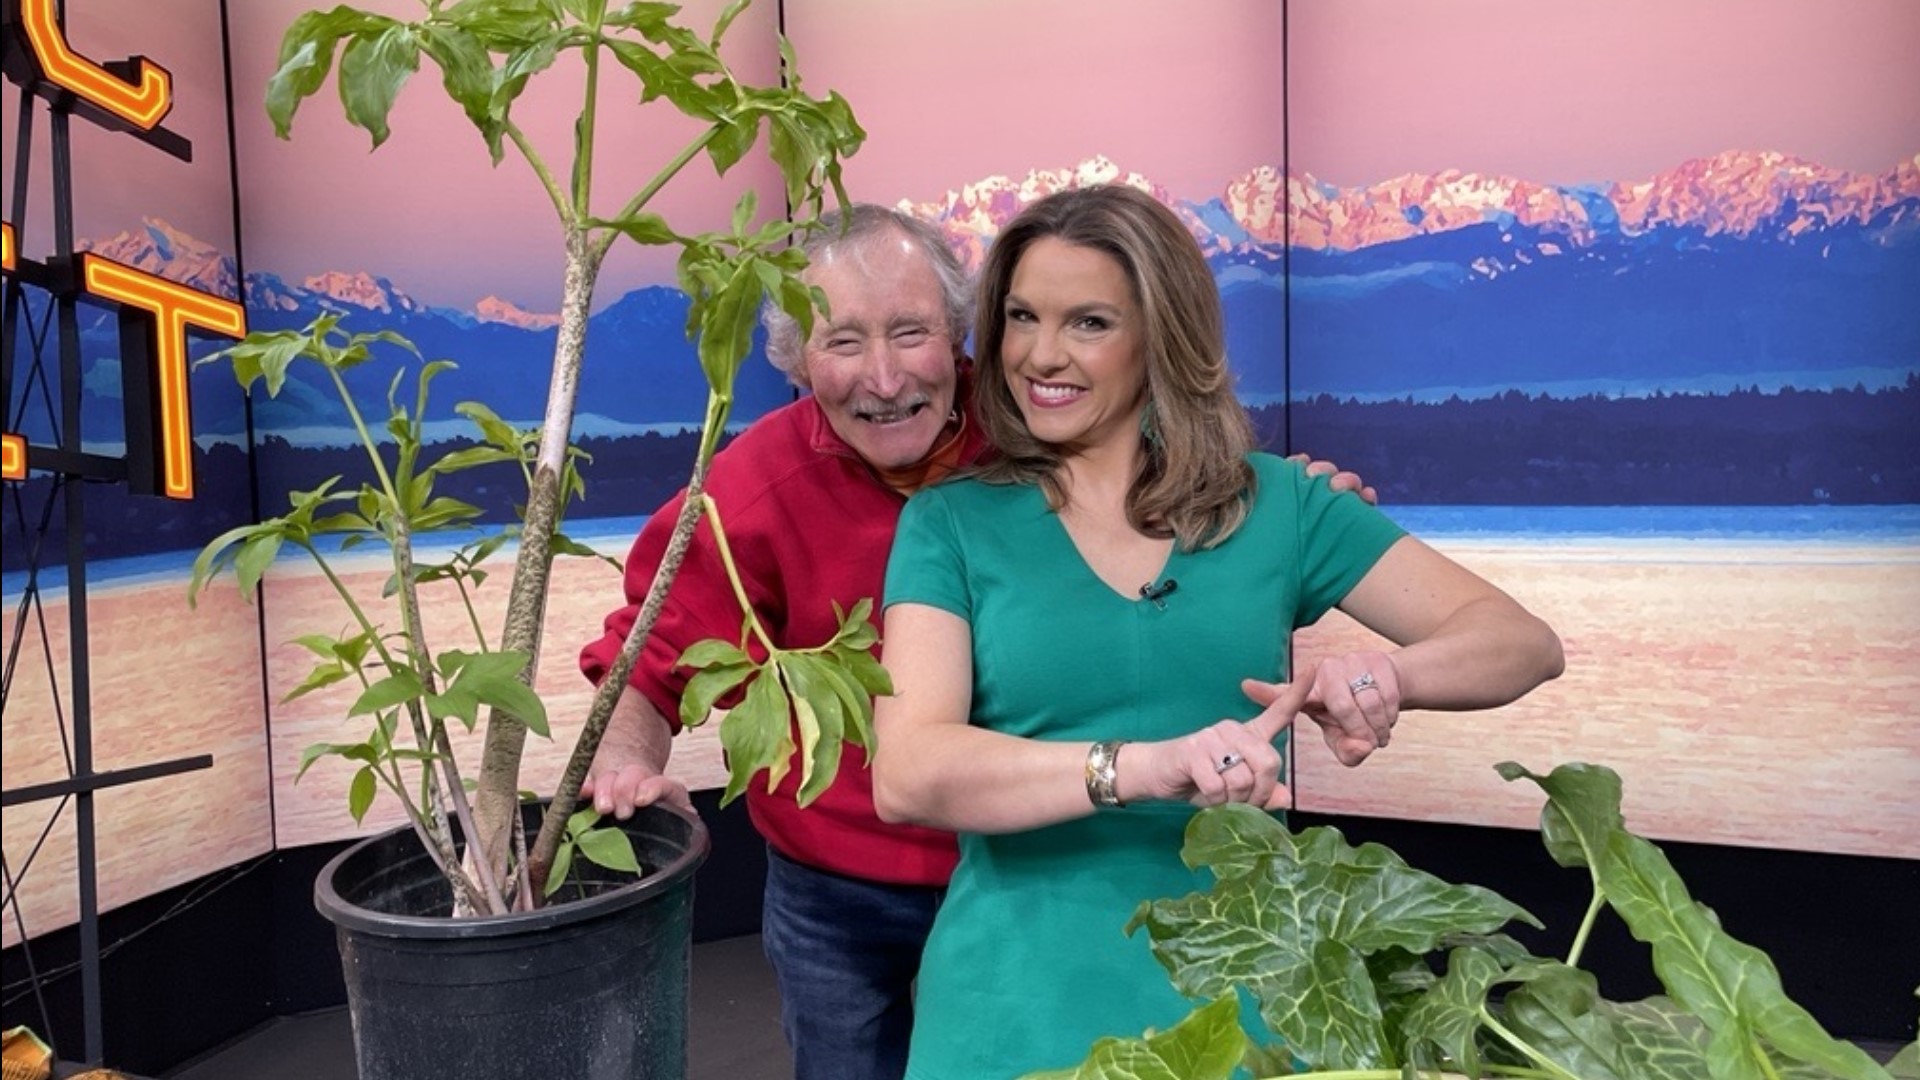 Master Gardener Ciscoe Morris is back to help us figure out how to spot an annoying plant in the garden. #newdaynw